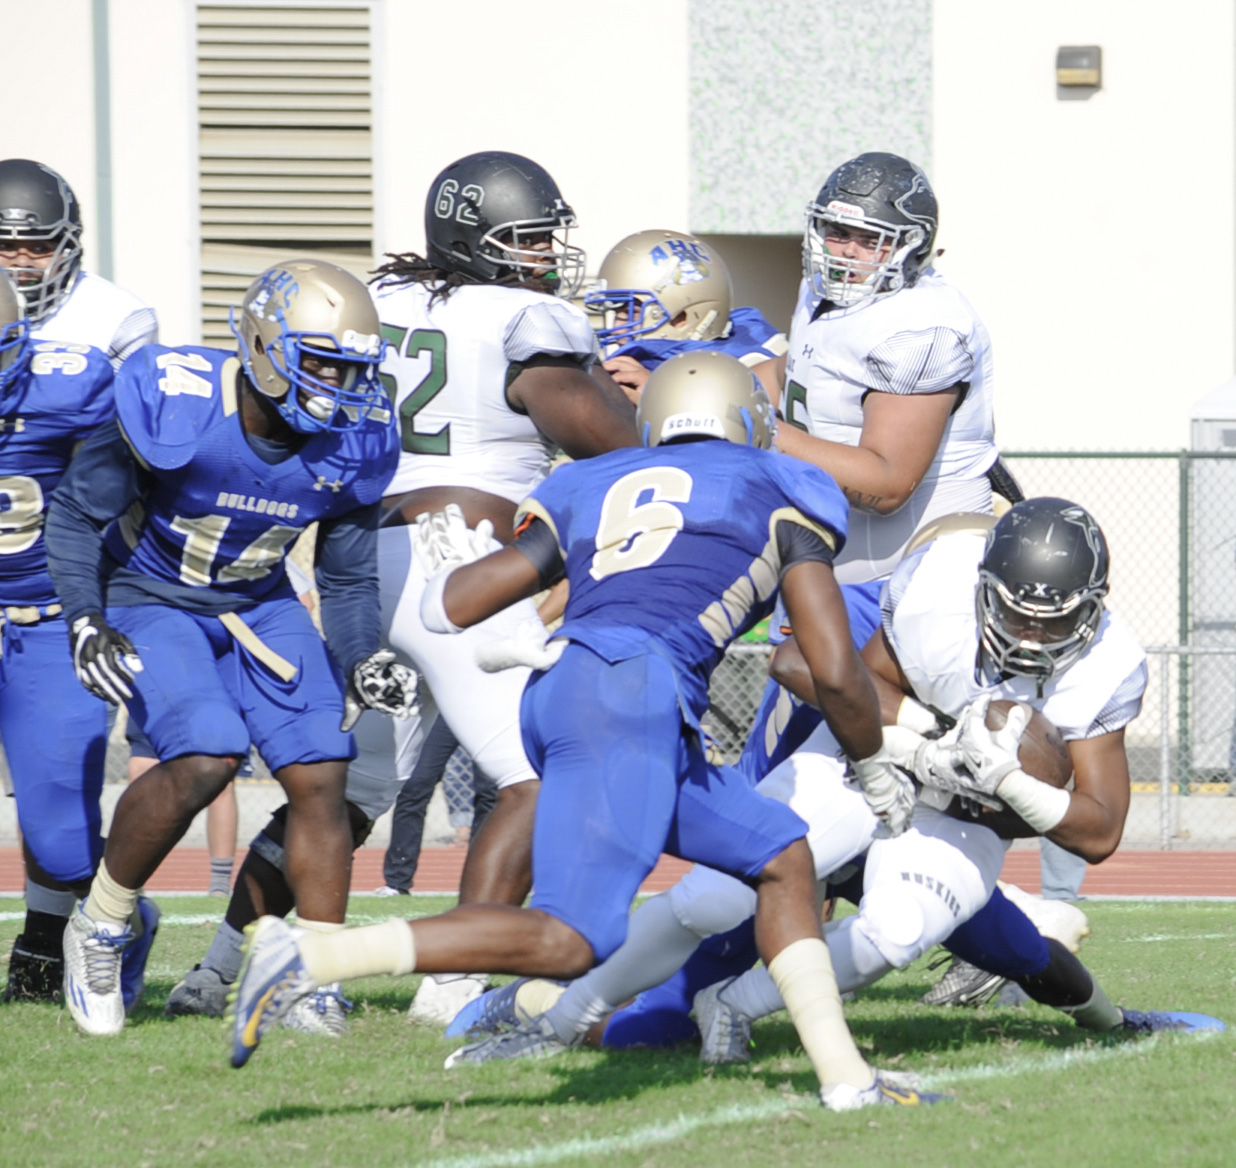 East Los Angeles College sophomore running back Nicholas Hutson eyes the goal line and scores a two-yard touchdown in a 21-13 loss to Allan Hancock College, Sept. 9, 2017. (Photo by Tadzio Garcia)